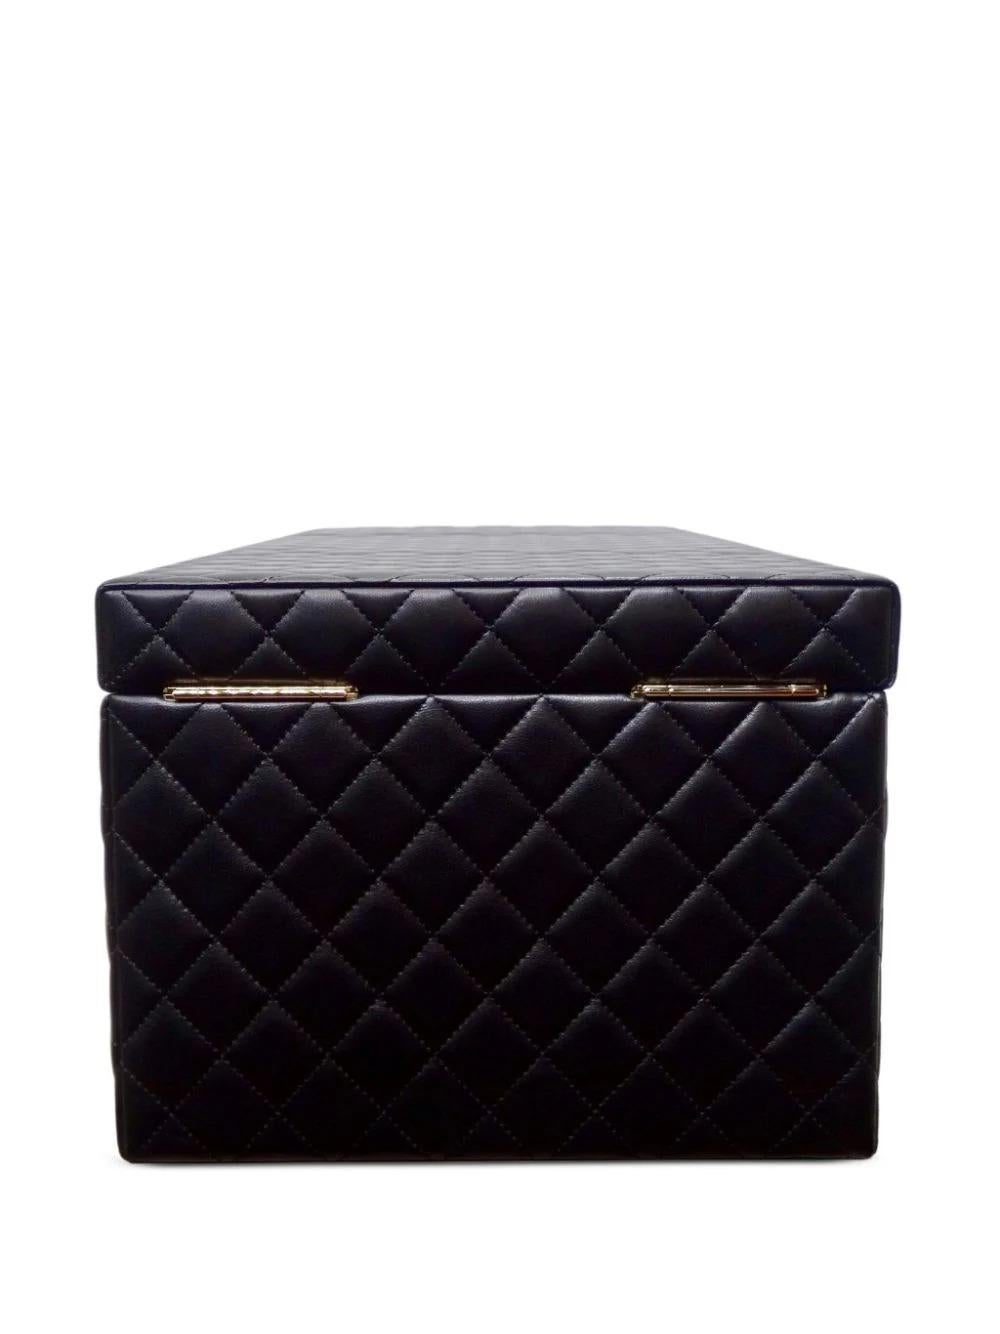 Chanel 2010 Diamond Quilted Lambskin Giant Jewelry Decor Case For Sale 1